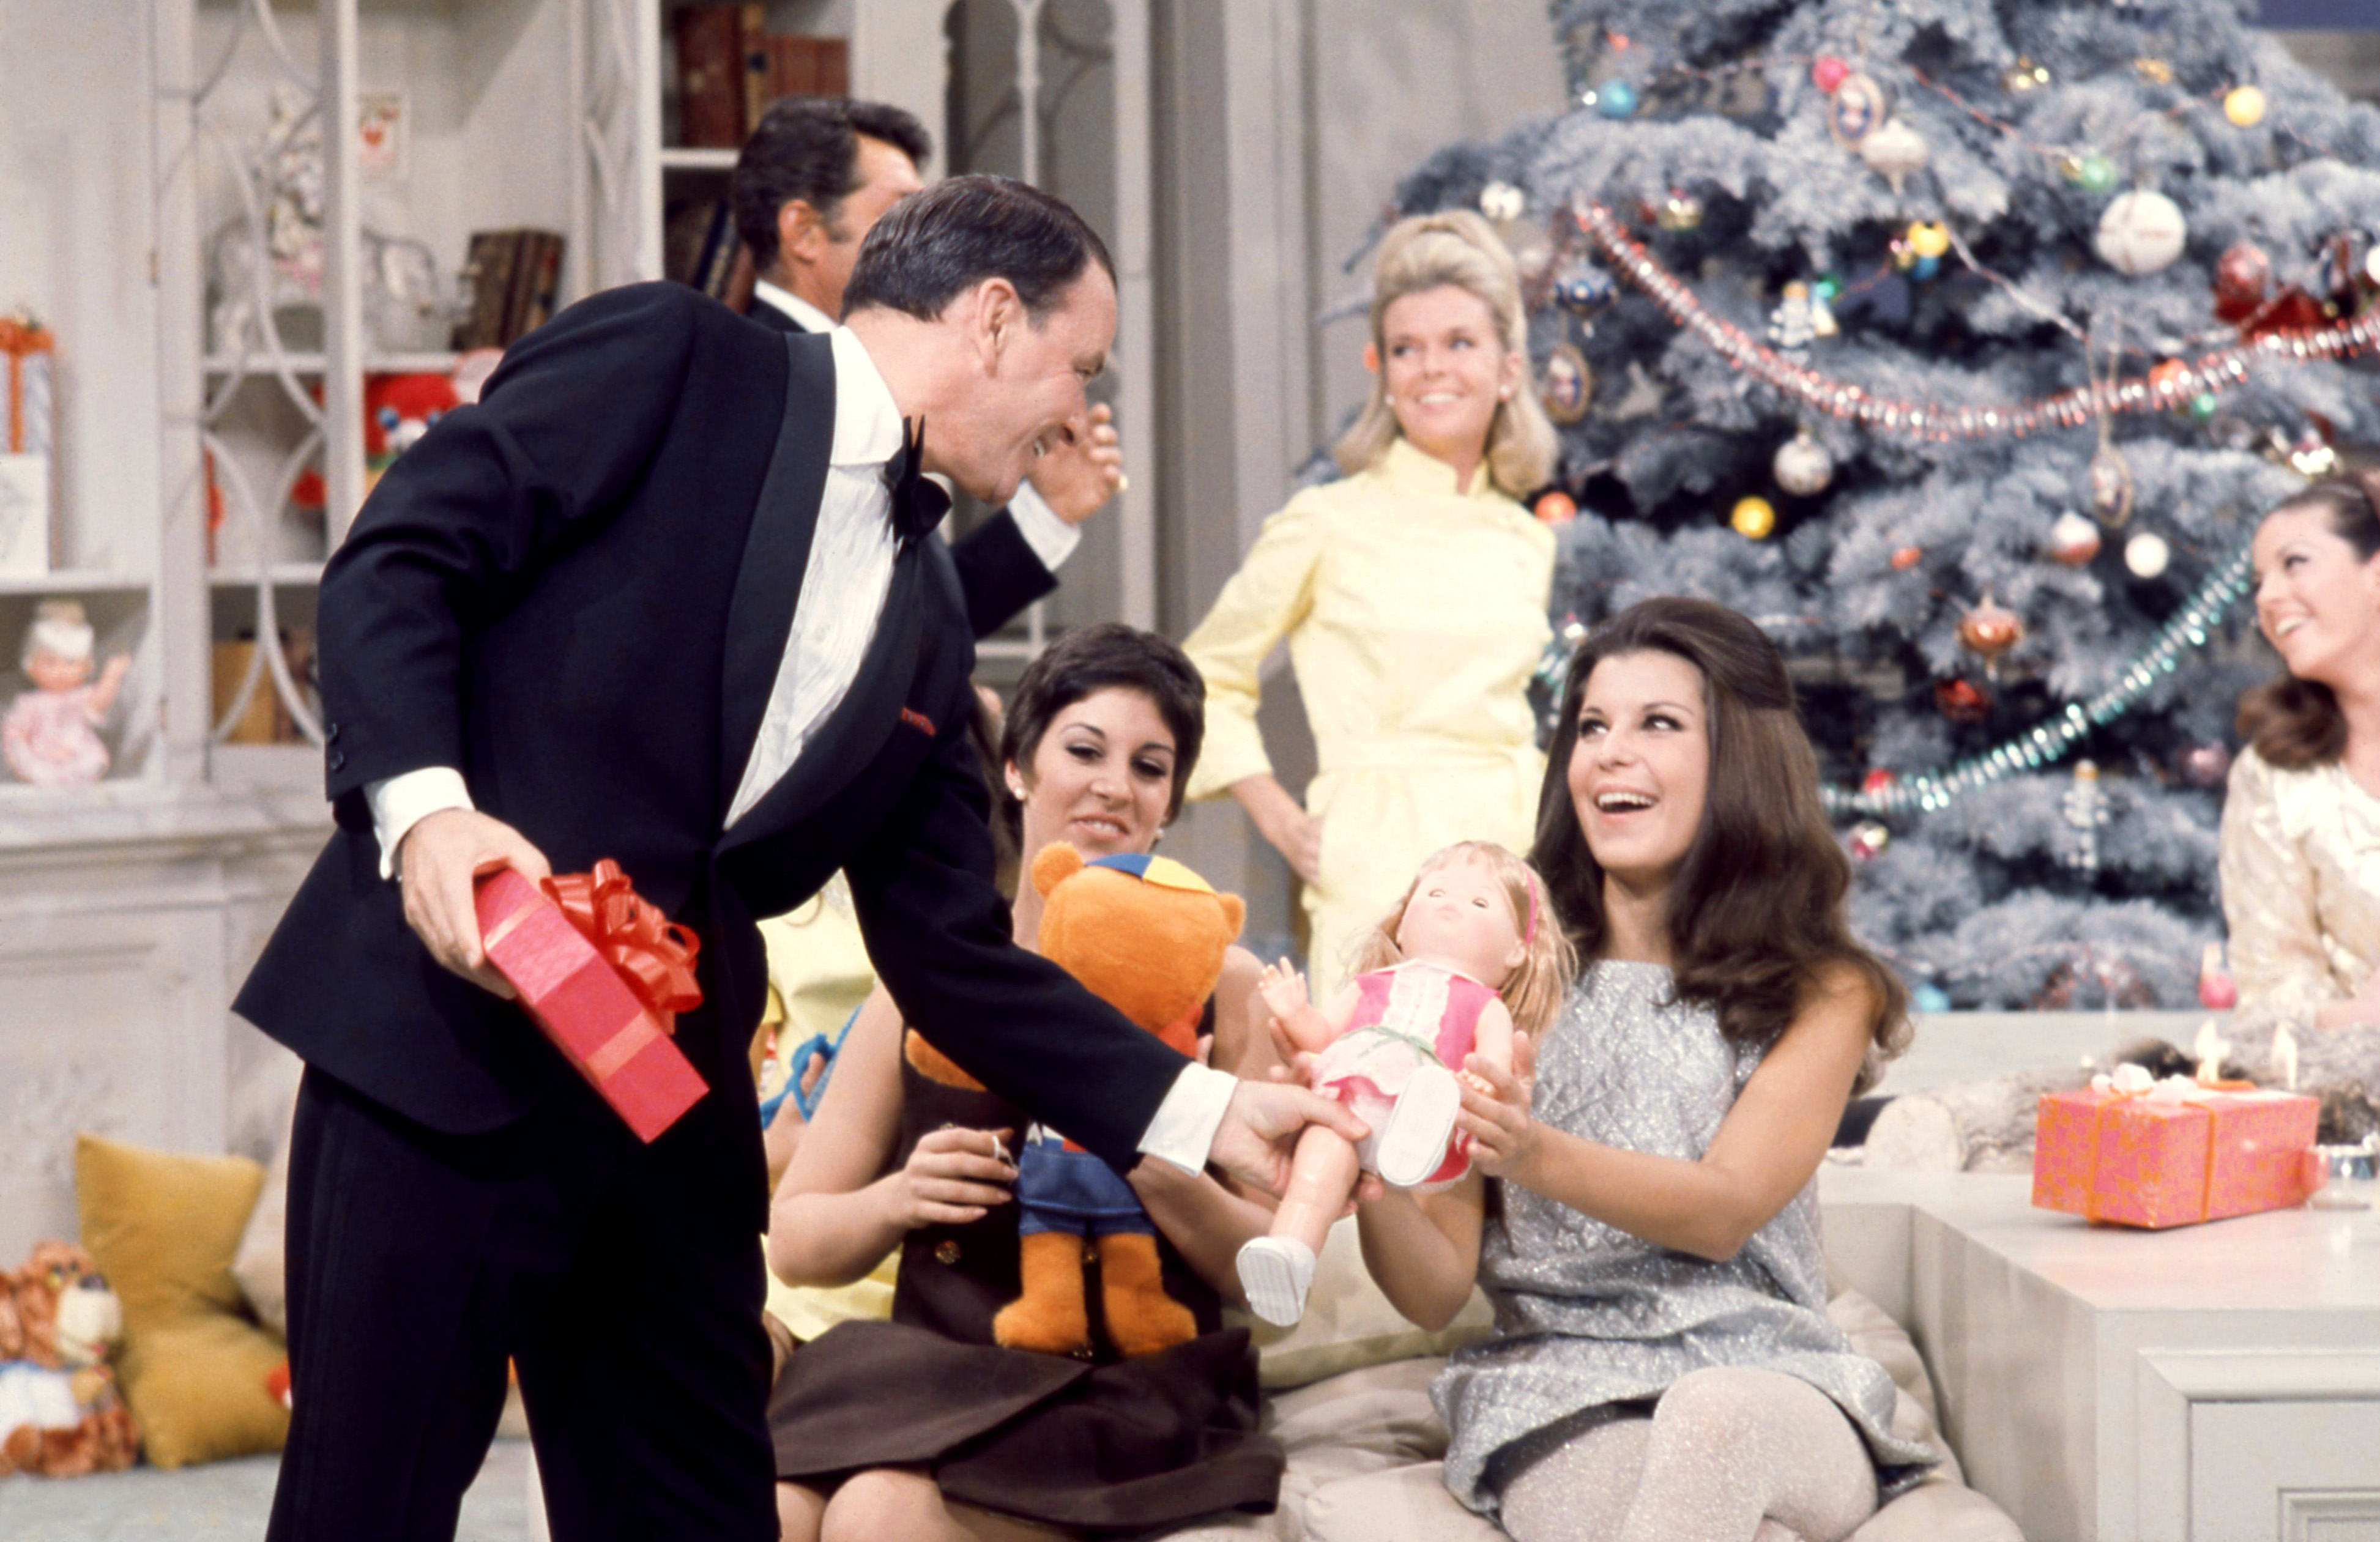 Frank Sinatra wears a tuxedo and hands presents to Deana Martin and Tina Sinatra in front of a Christmas tree.